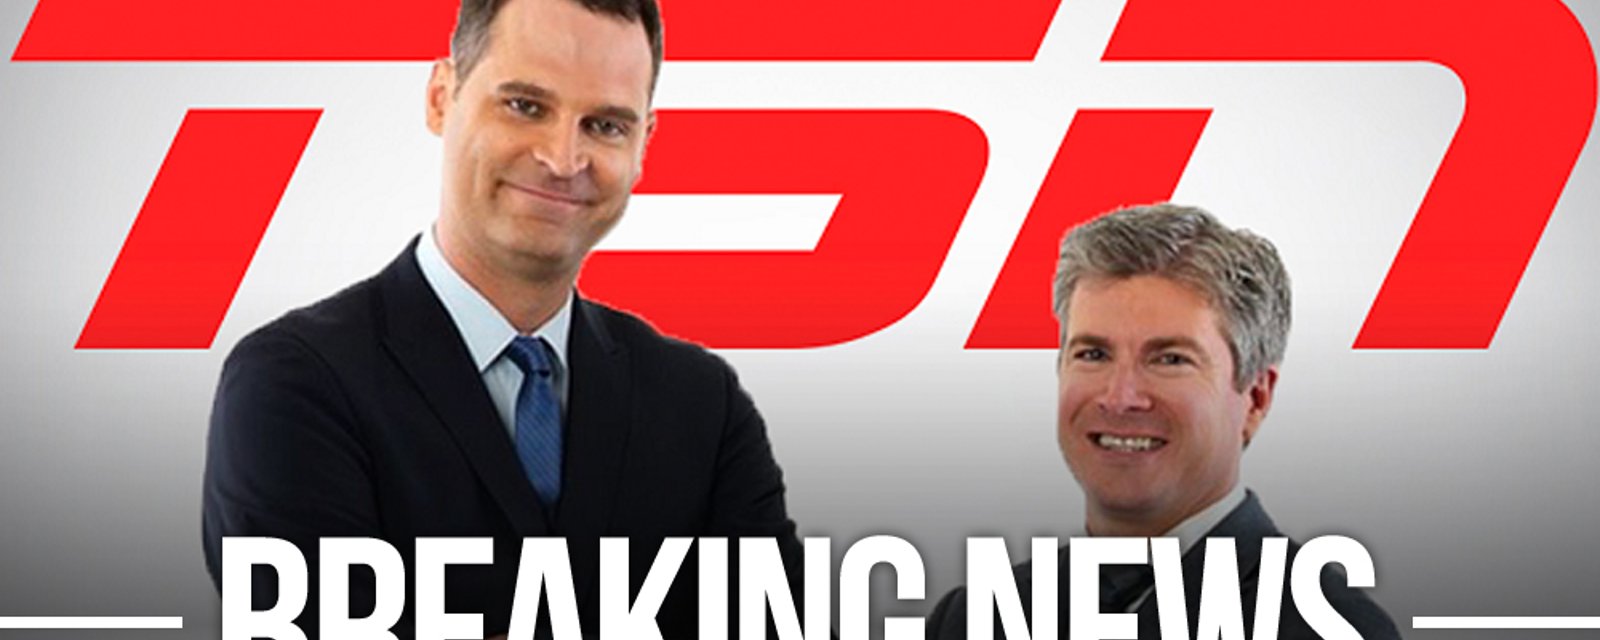 Dan O'Toole unloads on Bell Media after being fired from TSN.